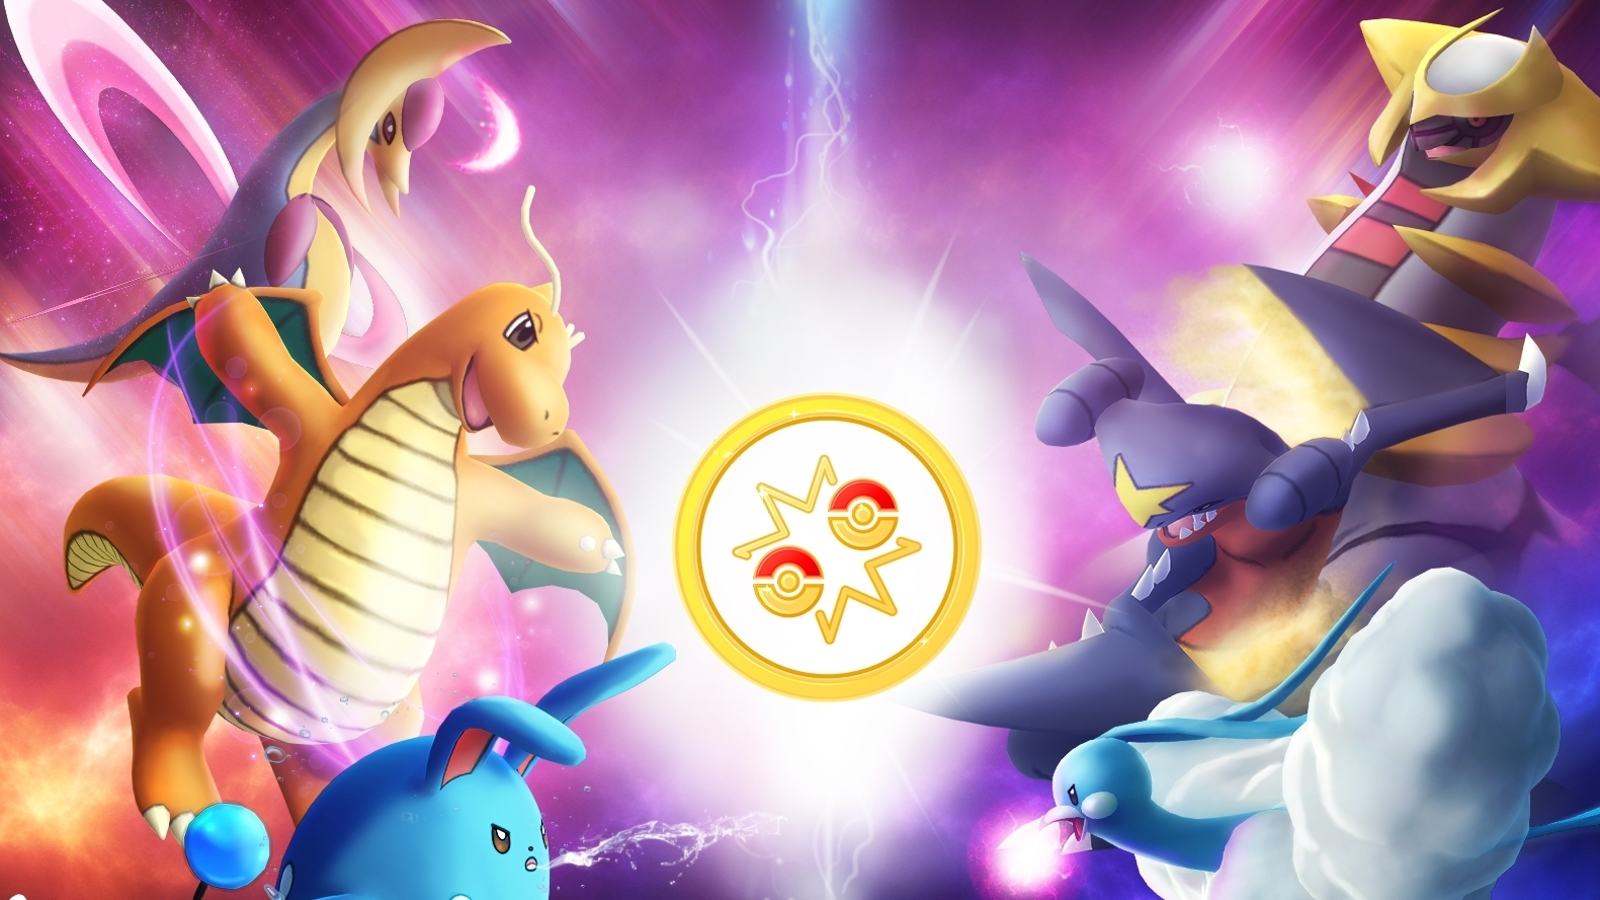 Pokémon GO on X: Trainers, Hyper Beam and Shadow Ball will become  exclusive moves for Mewtwo caught in EX Raids! Don't worry—it's not too  late for Mewtwo to learn either of these